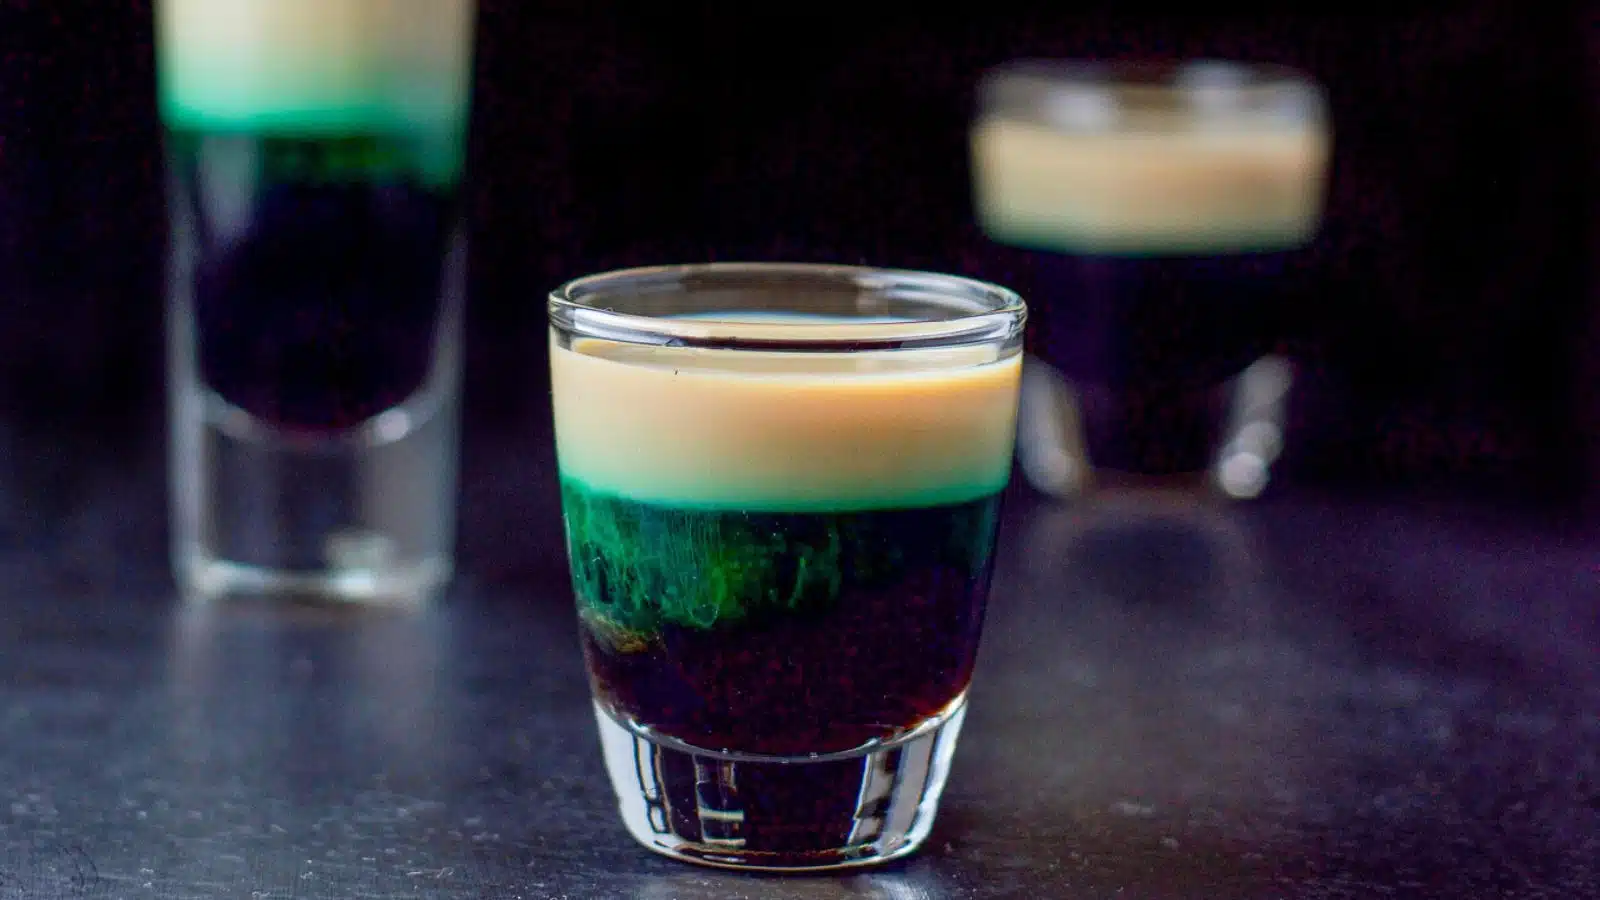 three shot glasses with a green, beige, and brown liquor layered in them